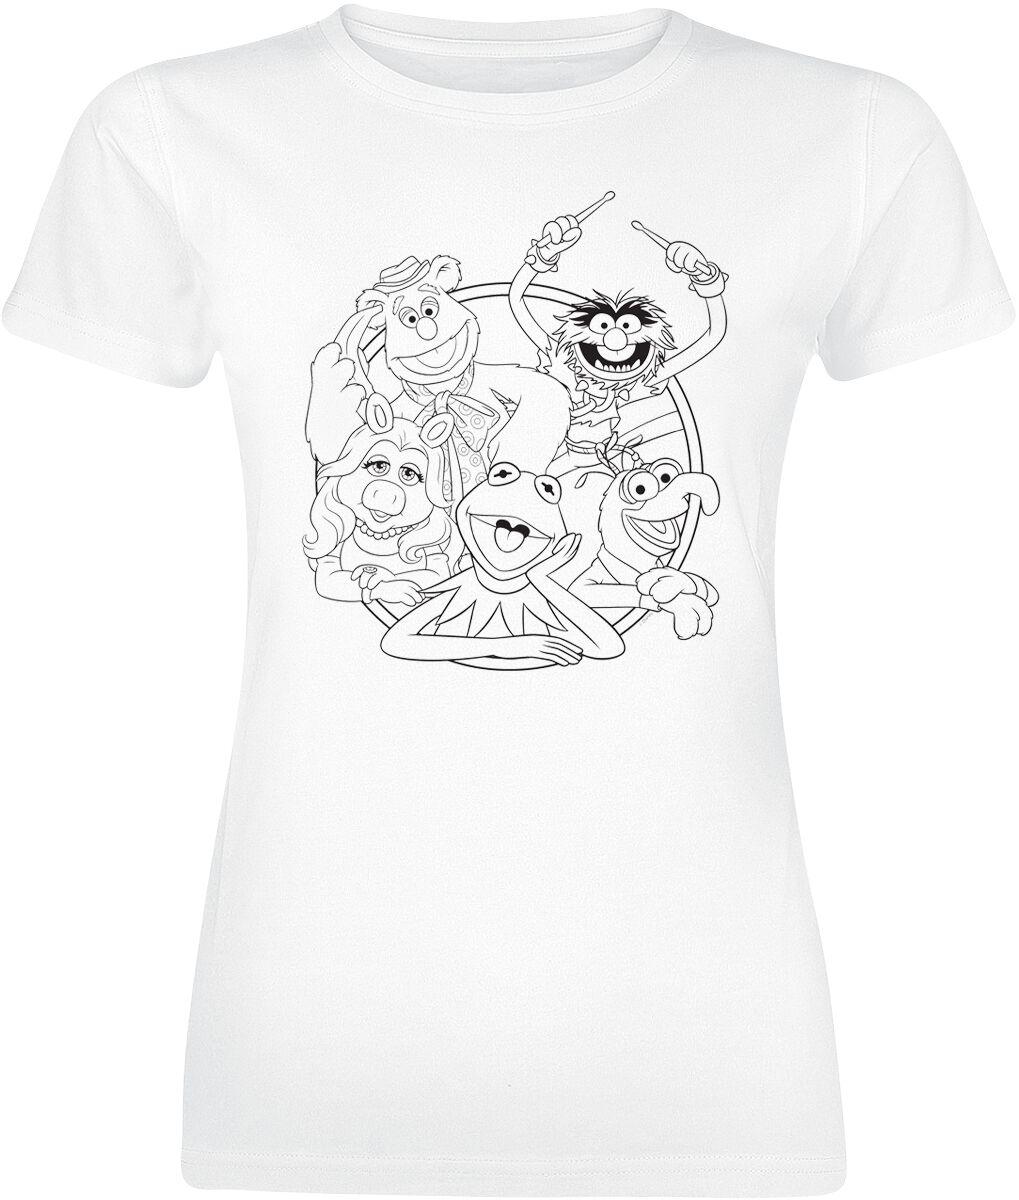 The Muppets Group Line Art T-Shirt white